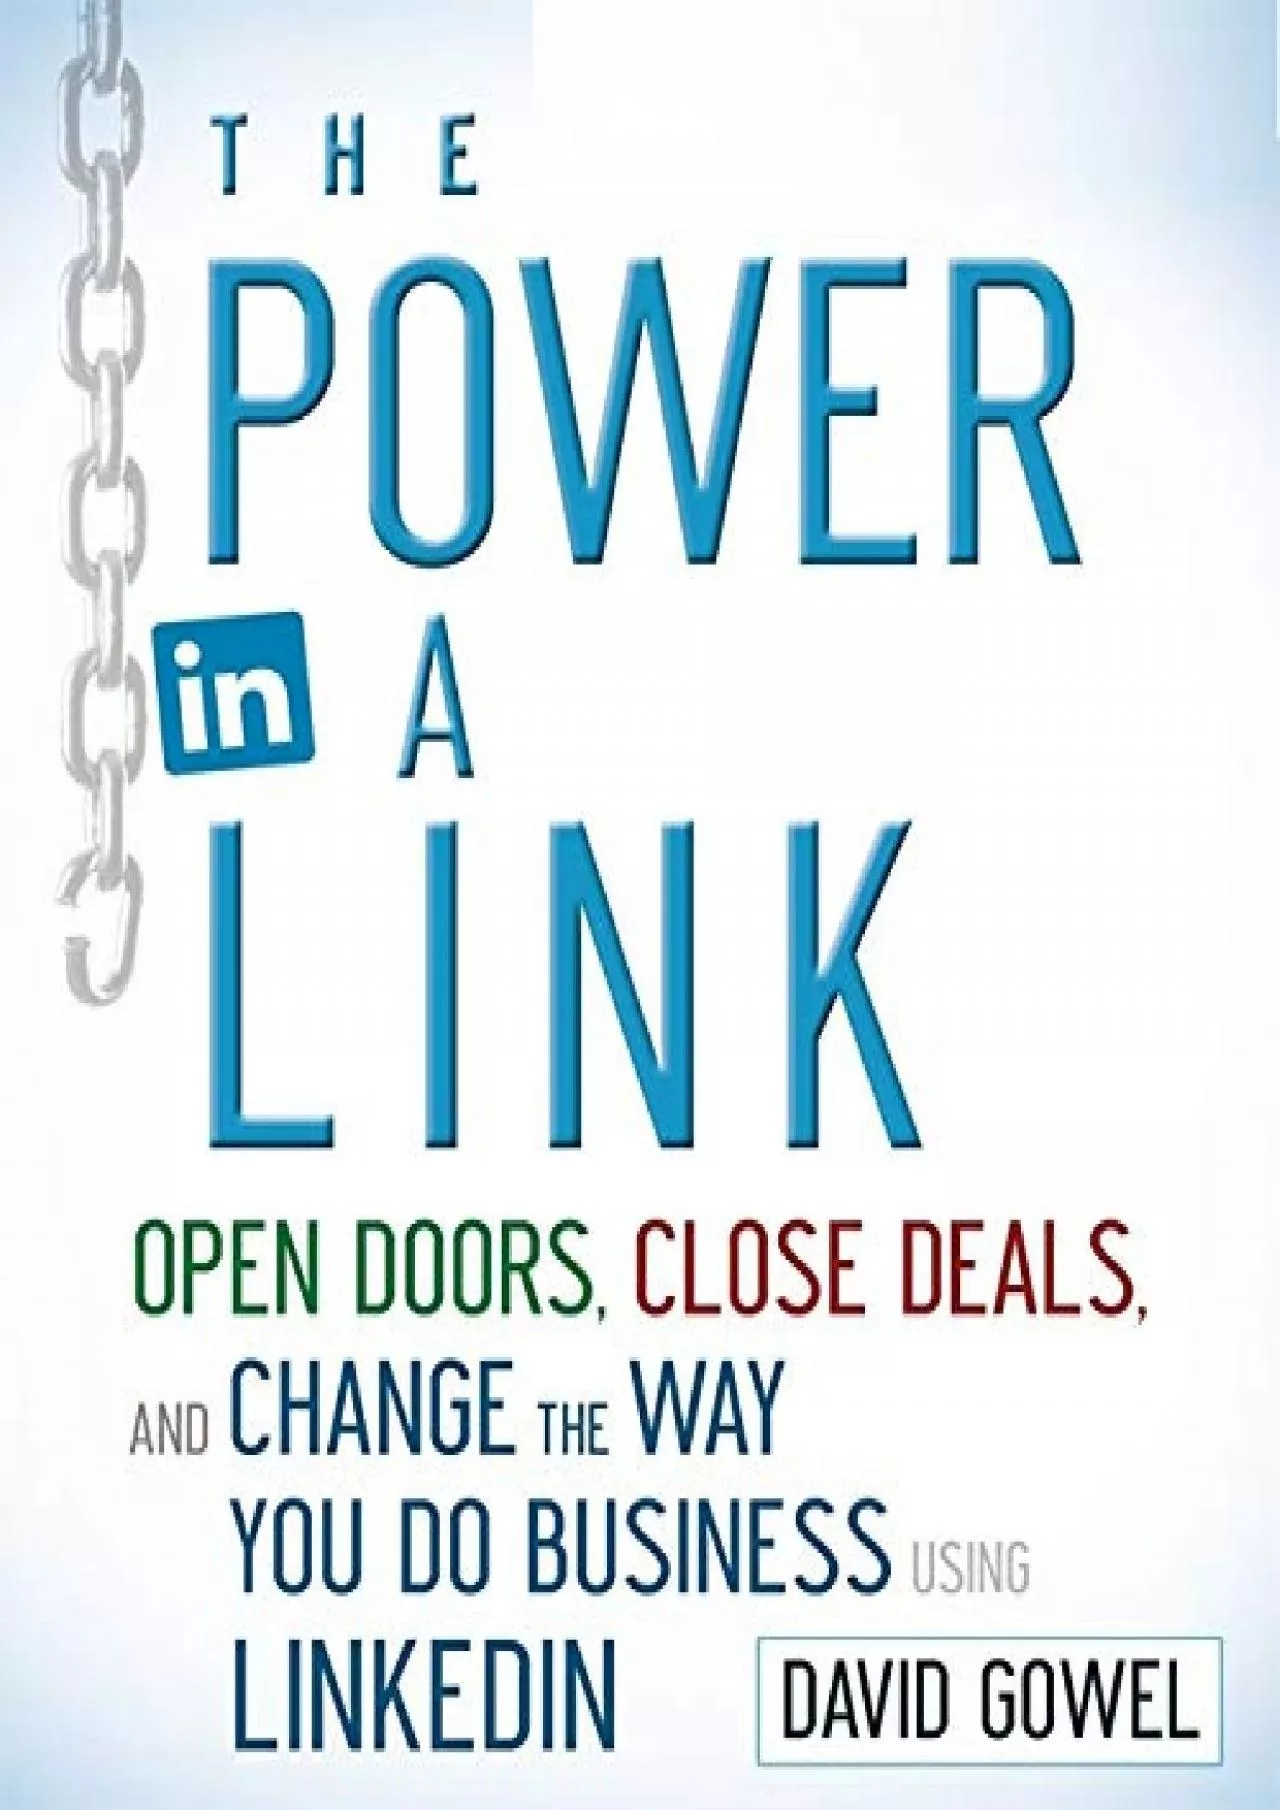 The Power in a Link Lib/E: Open Doors, Close Deals, and Change the Way You Do Business